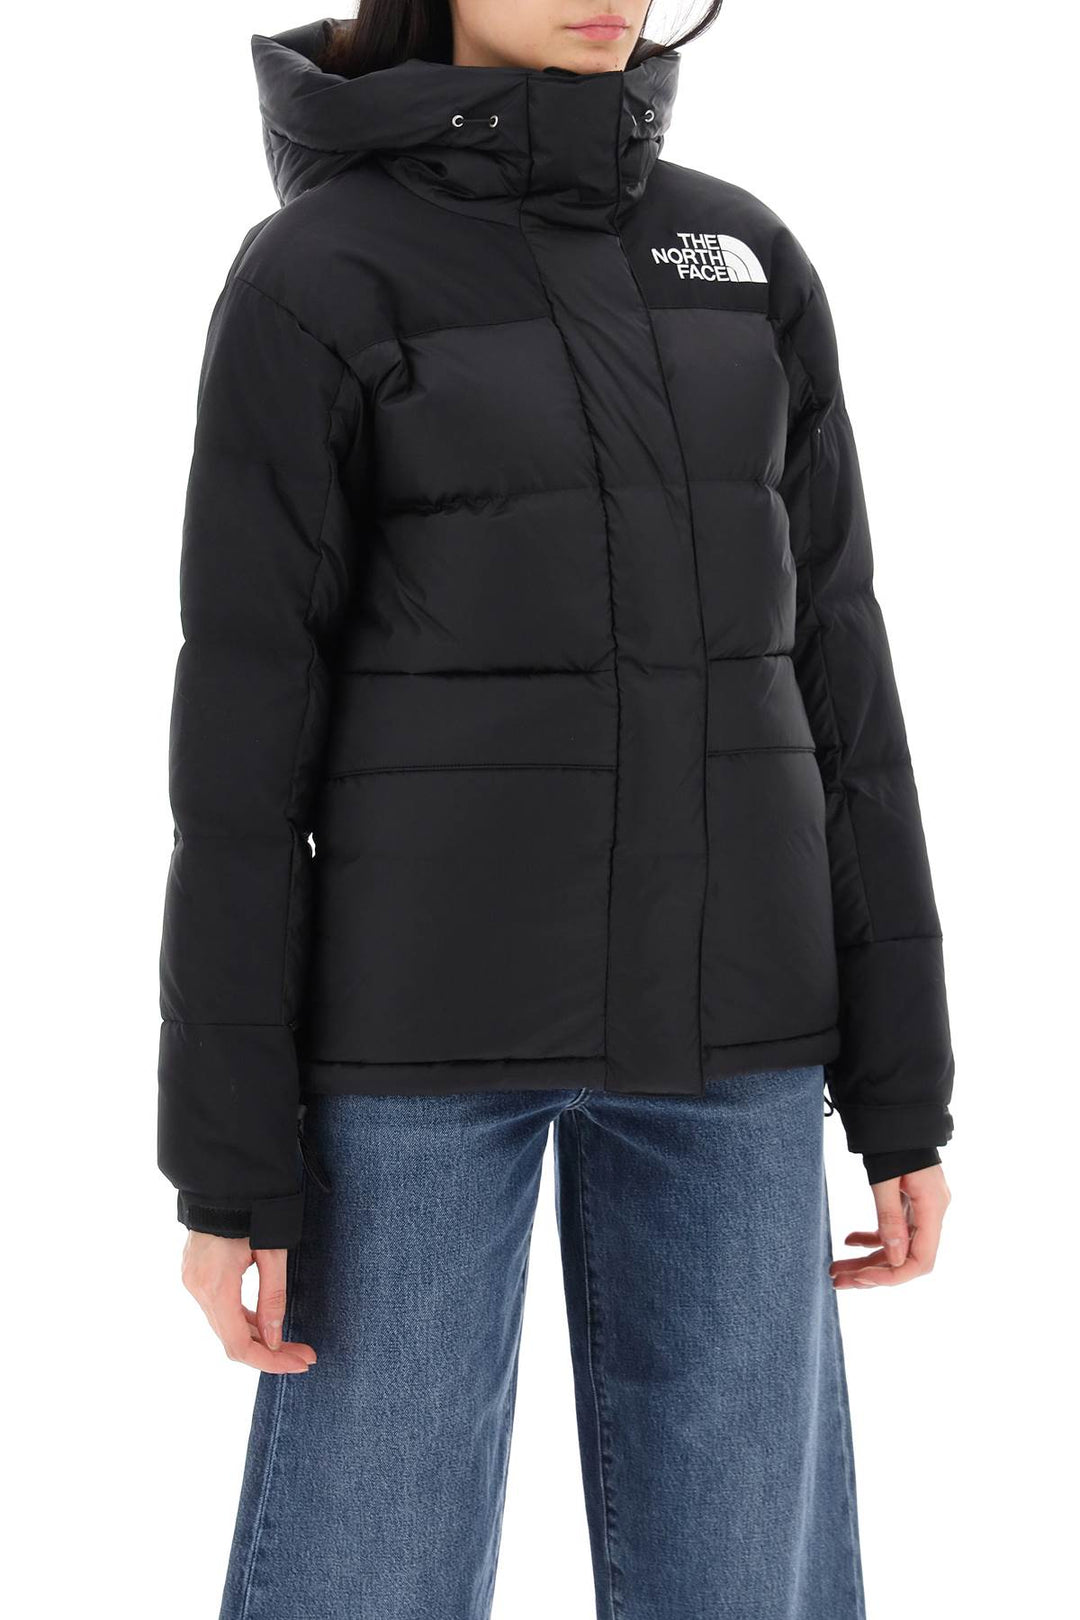 Parka Himalayan In Ripstop - The North Face - Donna